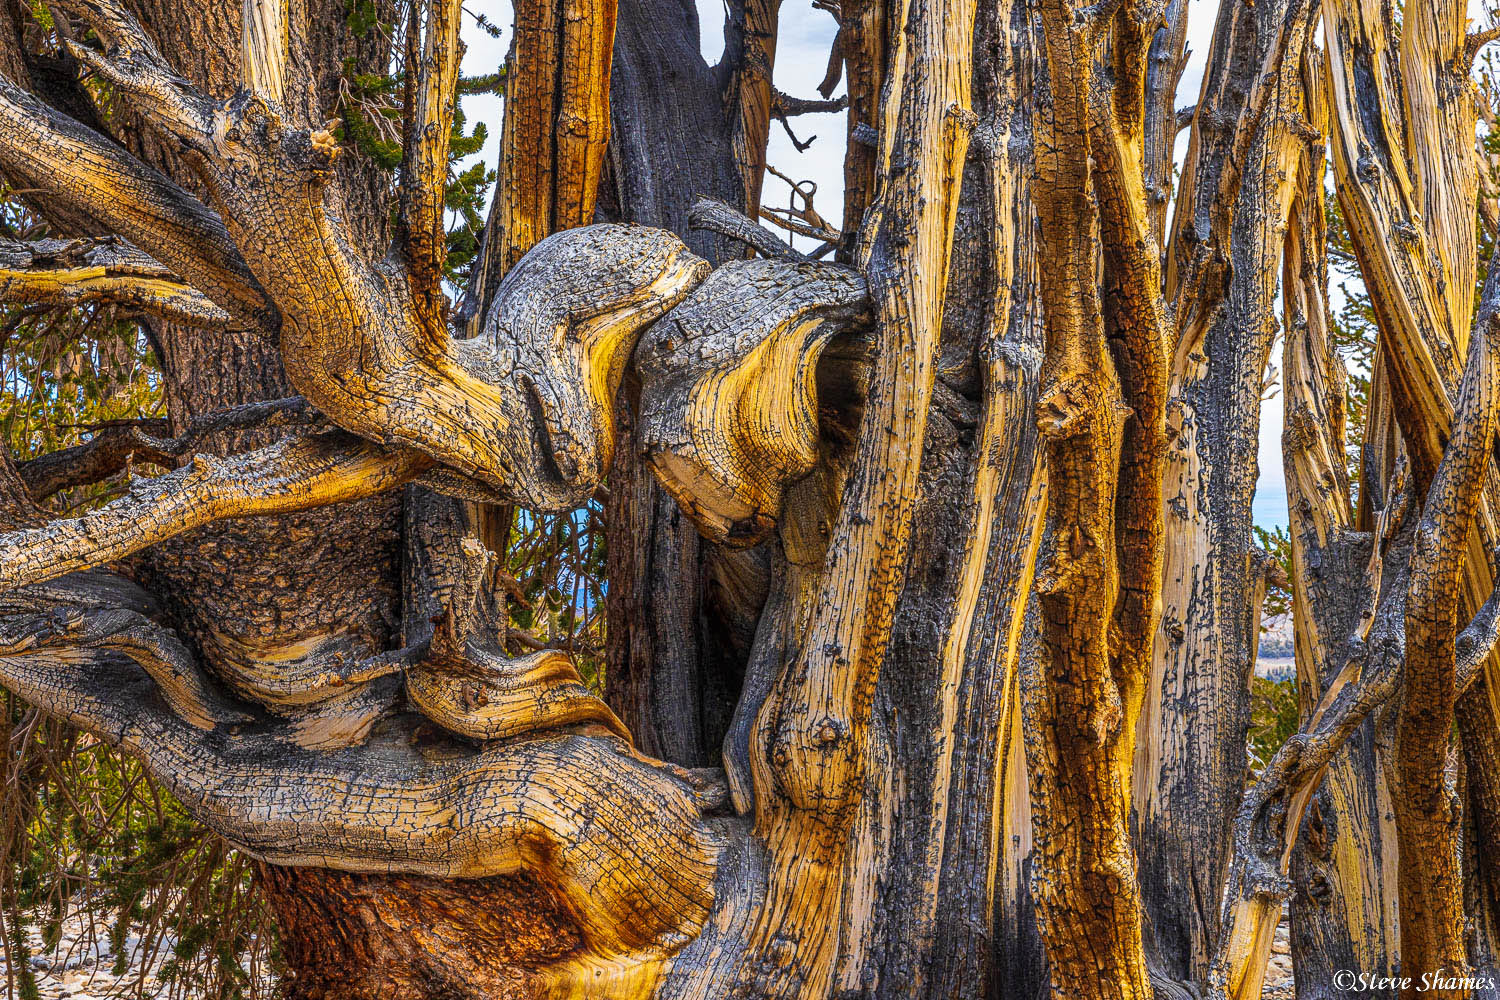 The twisted gnarly wood of a bristlecone pine tree.